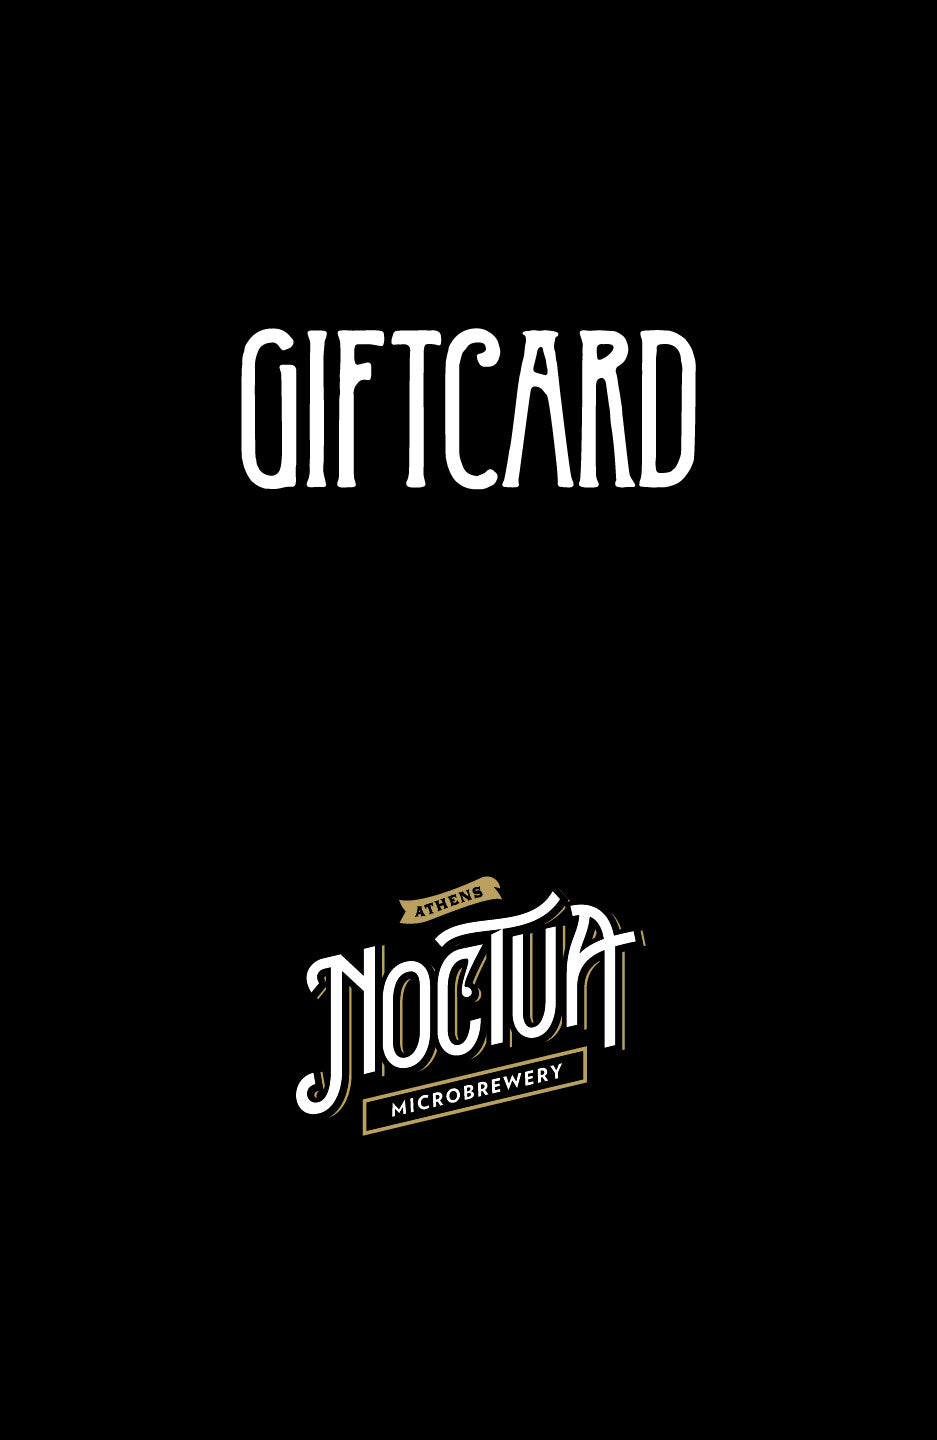 Noctua Brewery Gift Card